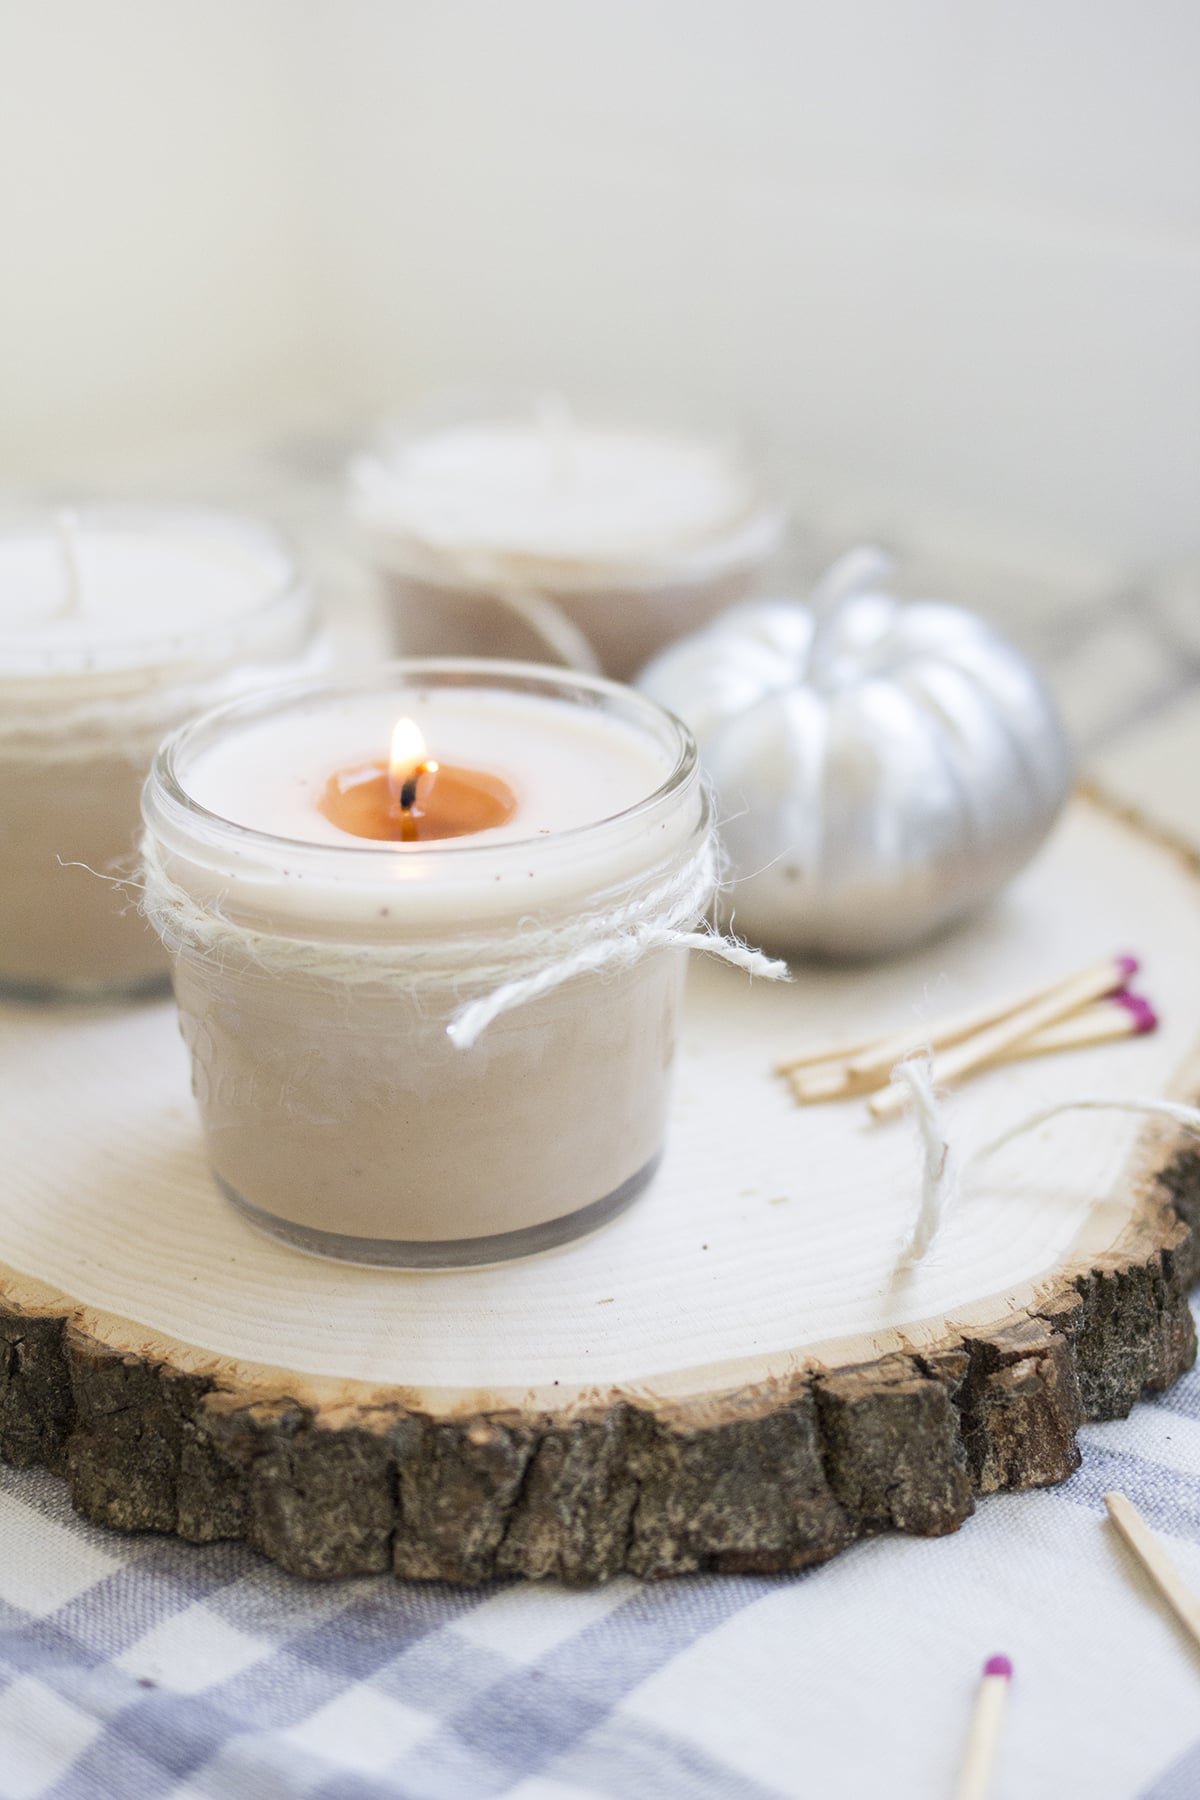 How to Make Candles with Soy Wax